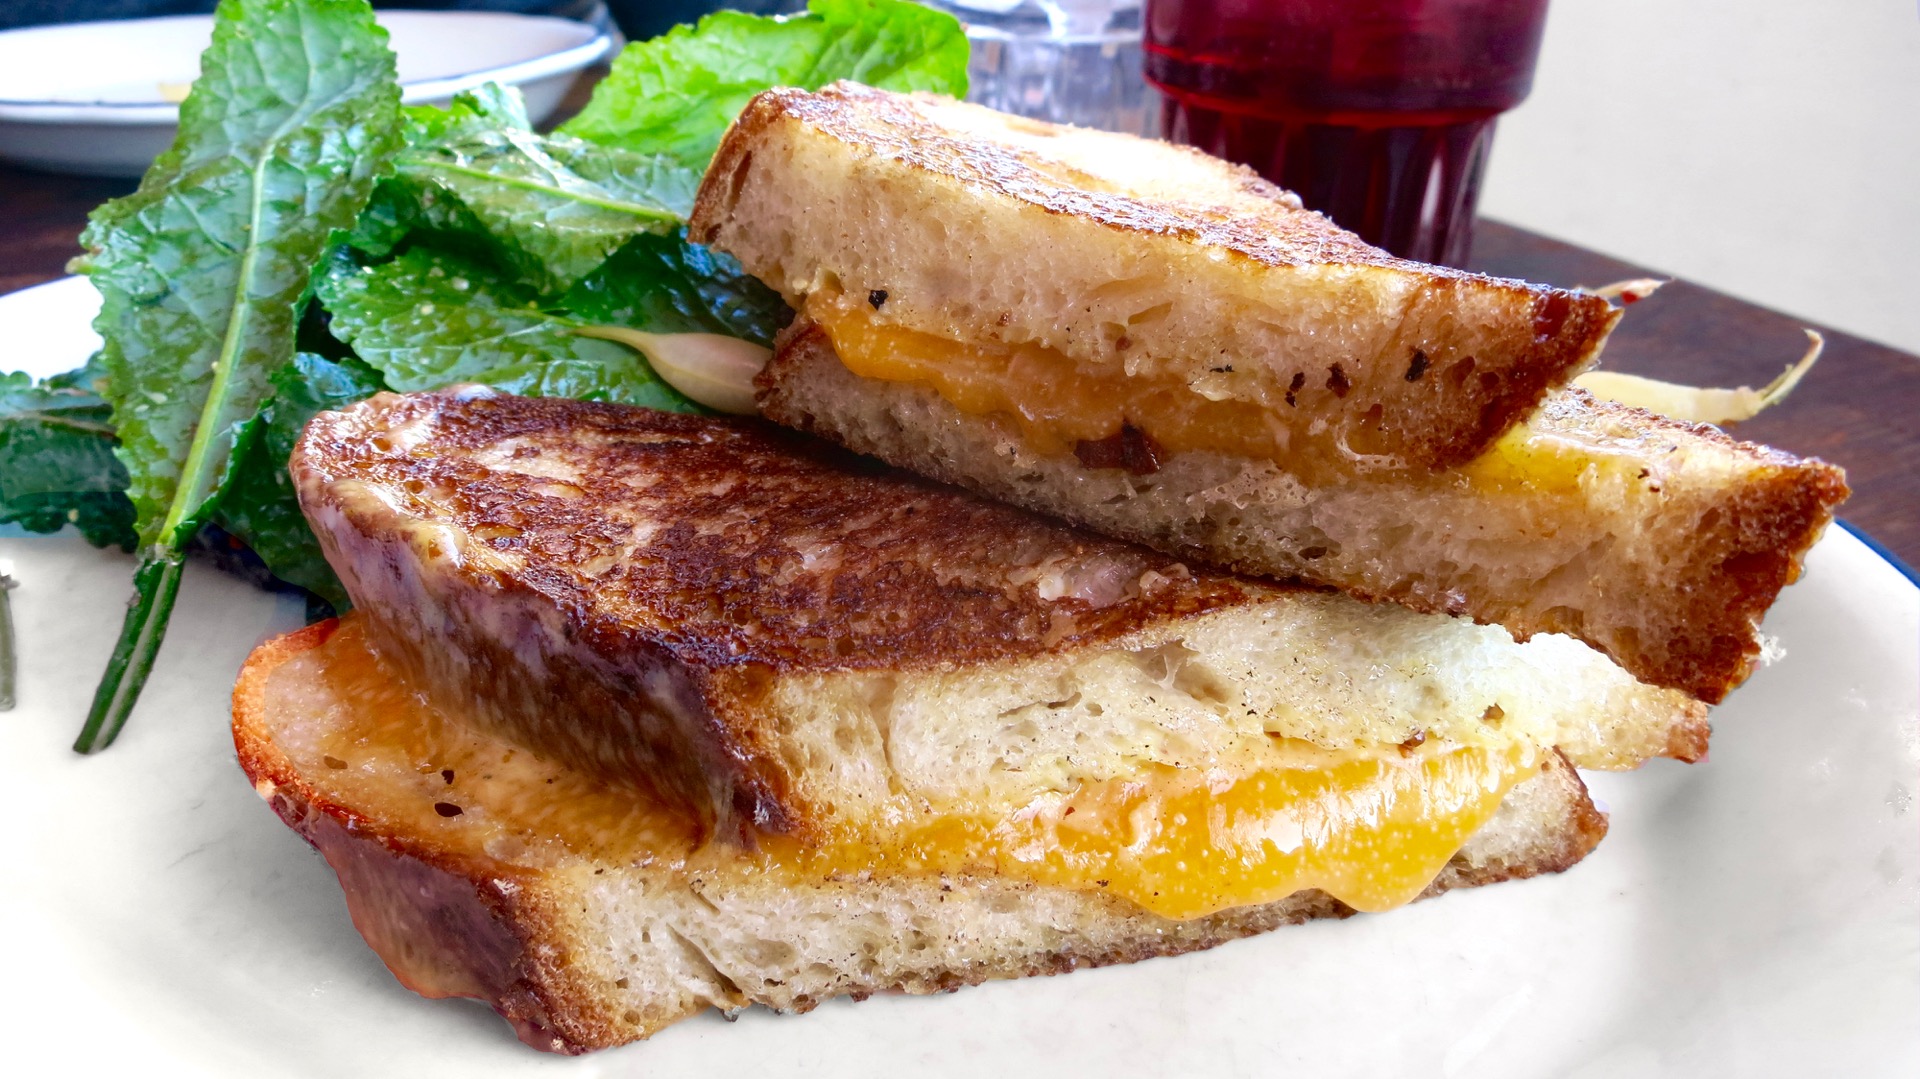 The whole grain mustard pairs well with the sharp cheddar on Grand Lake Kitchen's simple yet satisfying grilled cheese sandwich.